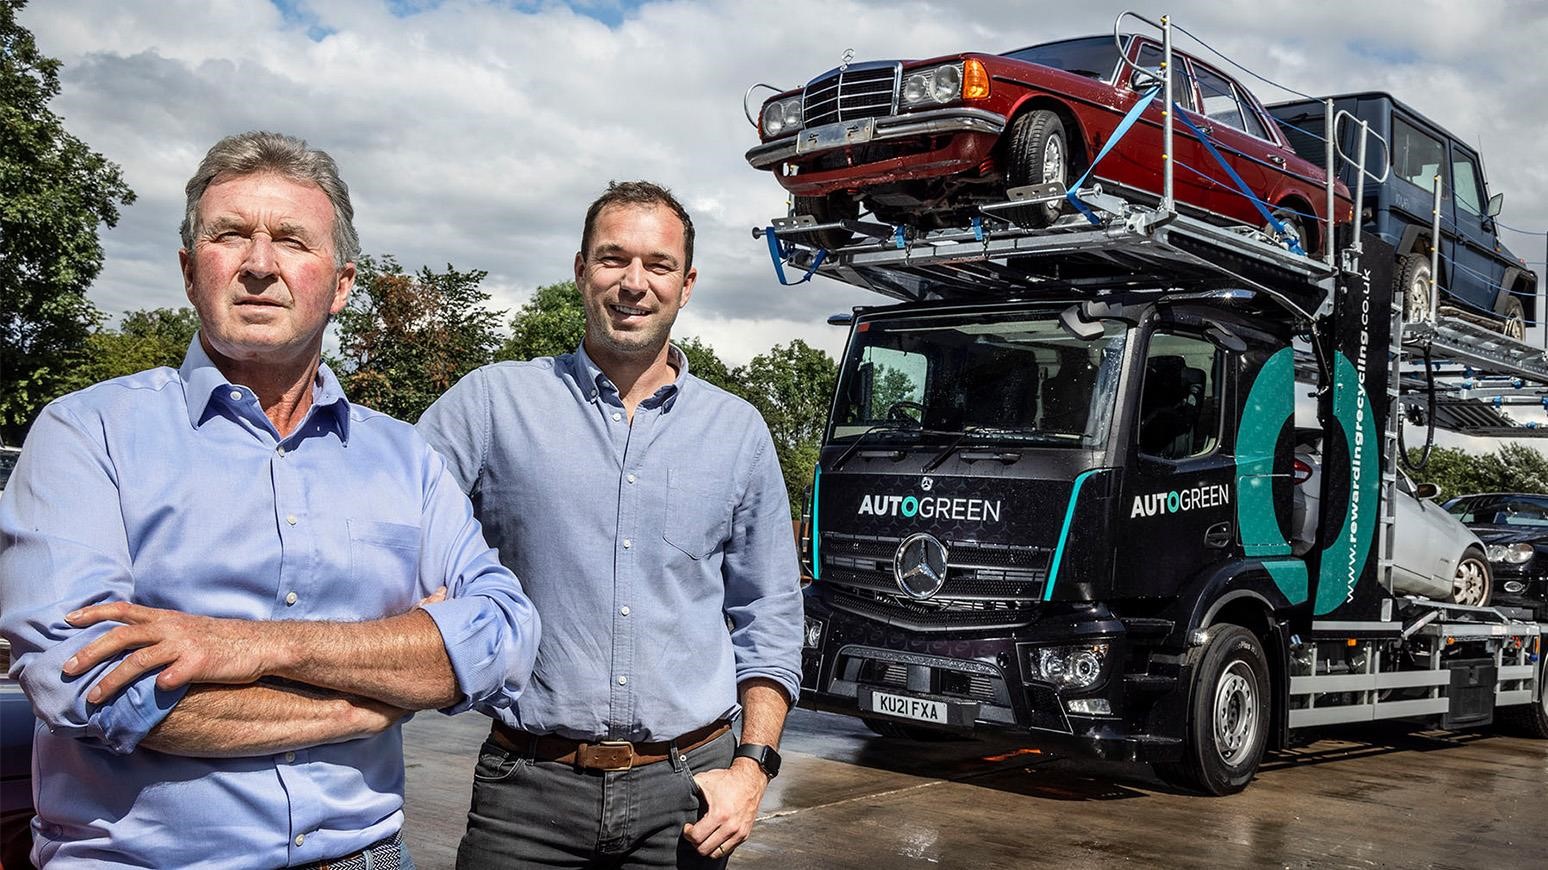 Mercedes-Benz Actros Hauls End-Of-Life Vehicles For Autogreen Vehicle Disposal Company